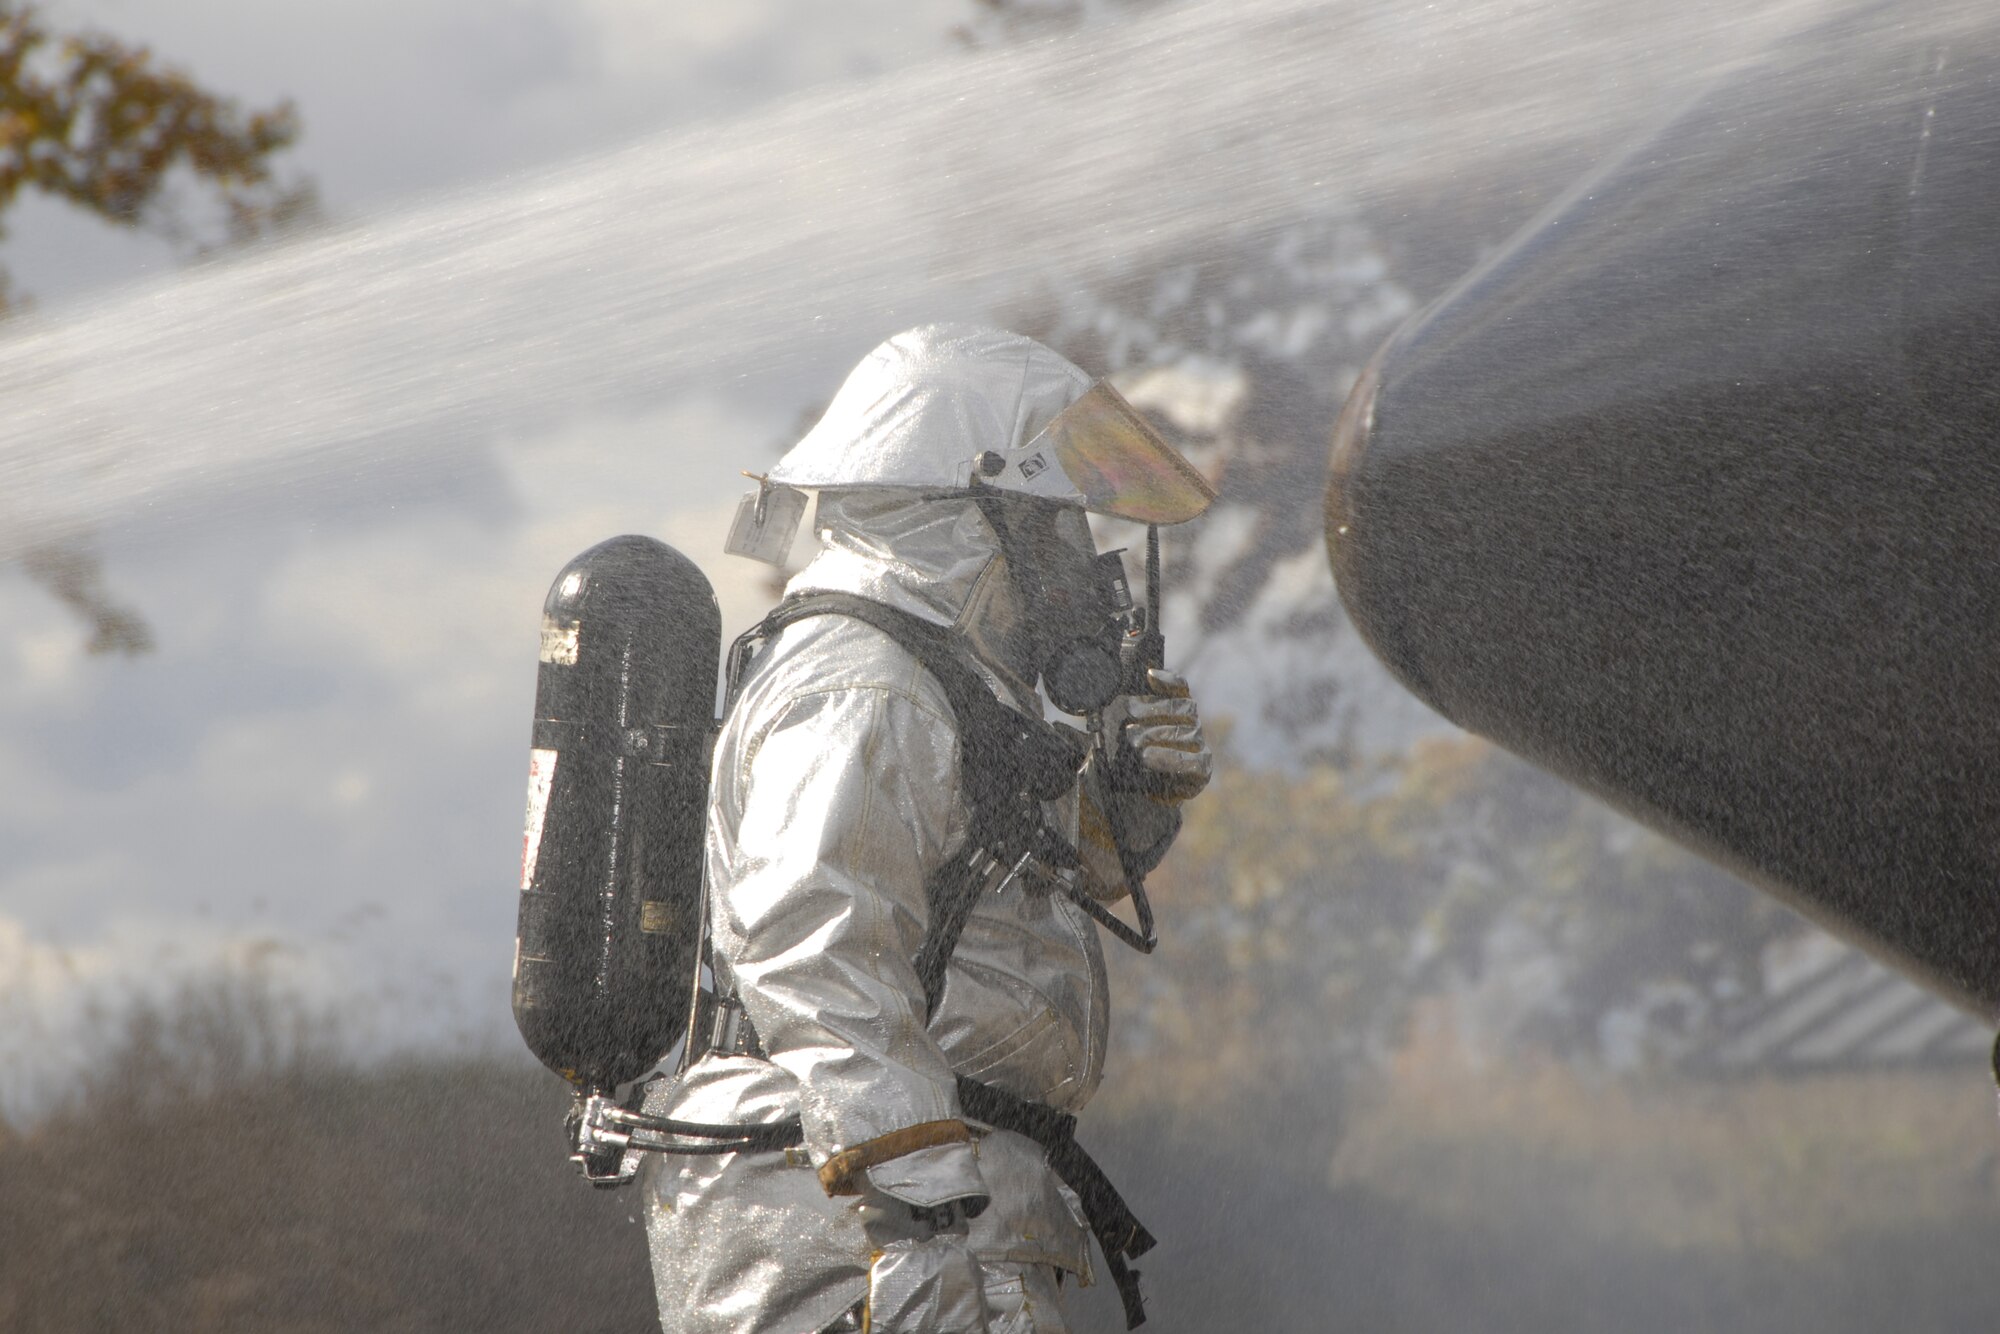 A Rescue Crew Chief of the 127th Fire Department, Selfridge ANGB, Mich., walks under the stream of a charged fire hose while communicating to rescue team members via radio during a simulated aircraft crash site drill Oct. 18 at the CRTC training base in Alpena, Mich. The Rescue Crew Chief’s job is to safely enter a potentially volatile area and locate survivors or fatalities.  (U.S. Air Force photo by Tecnical Sgt David S. Kujawa)